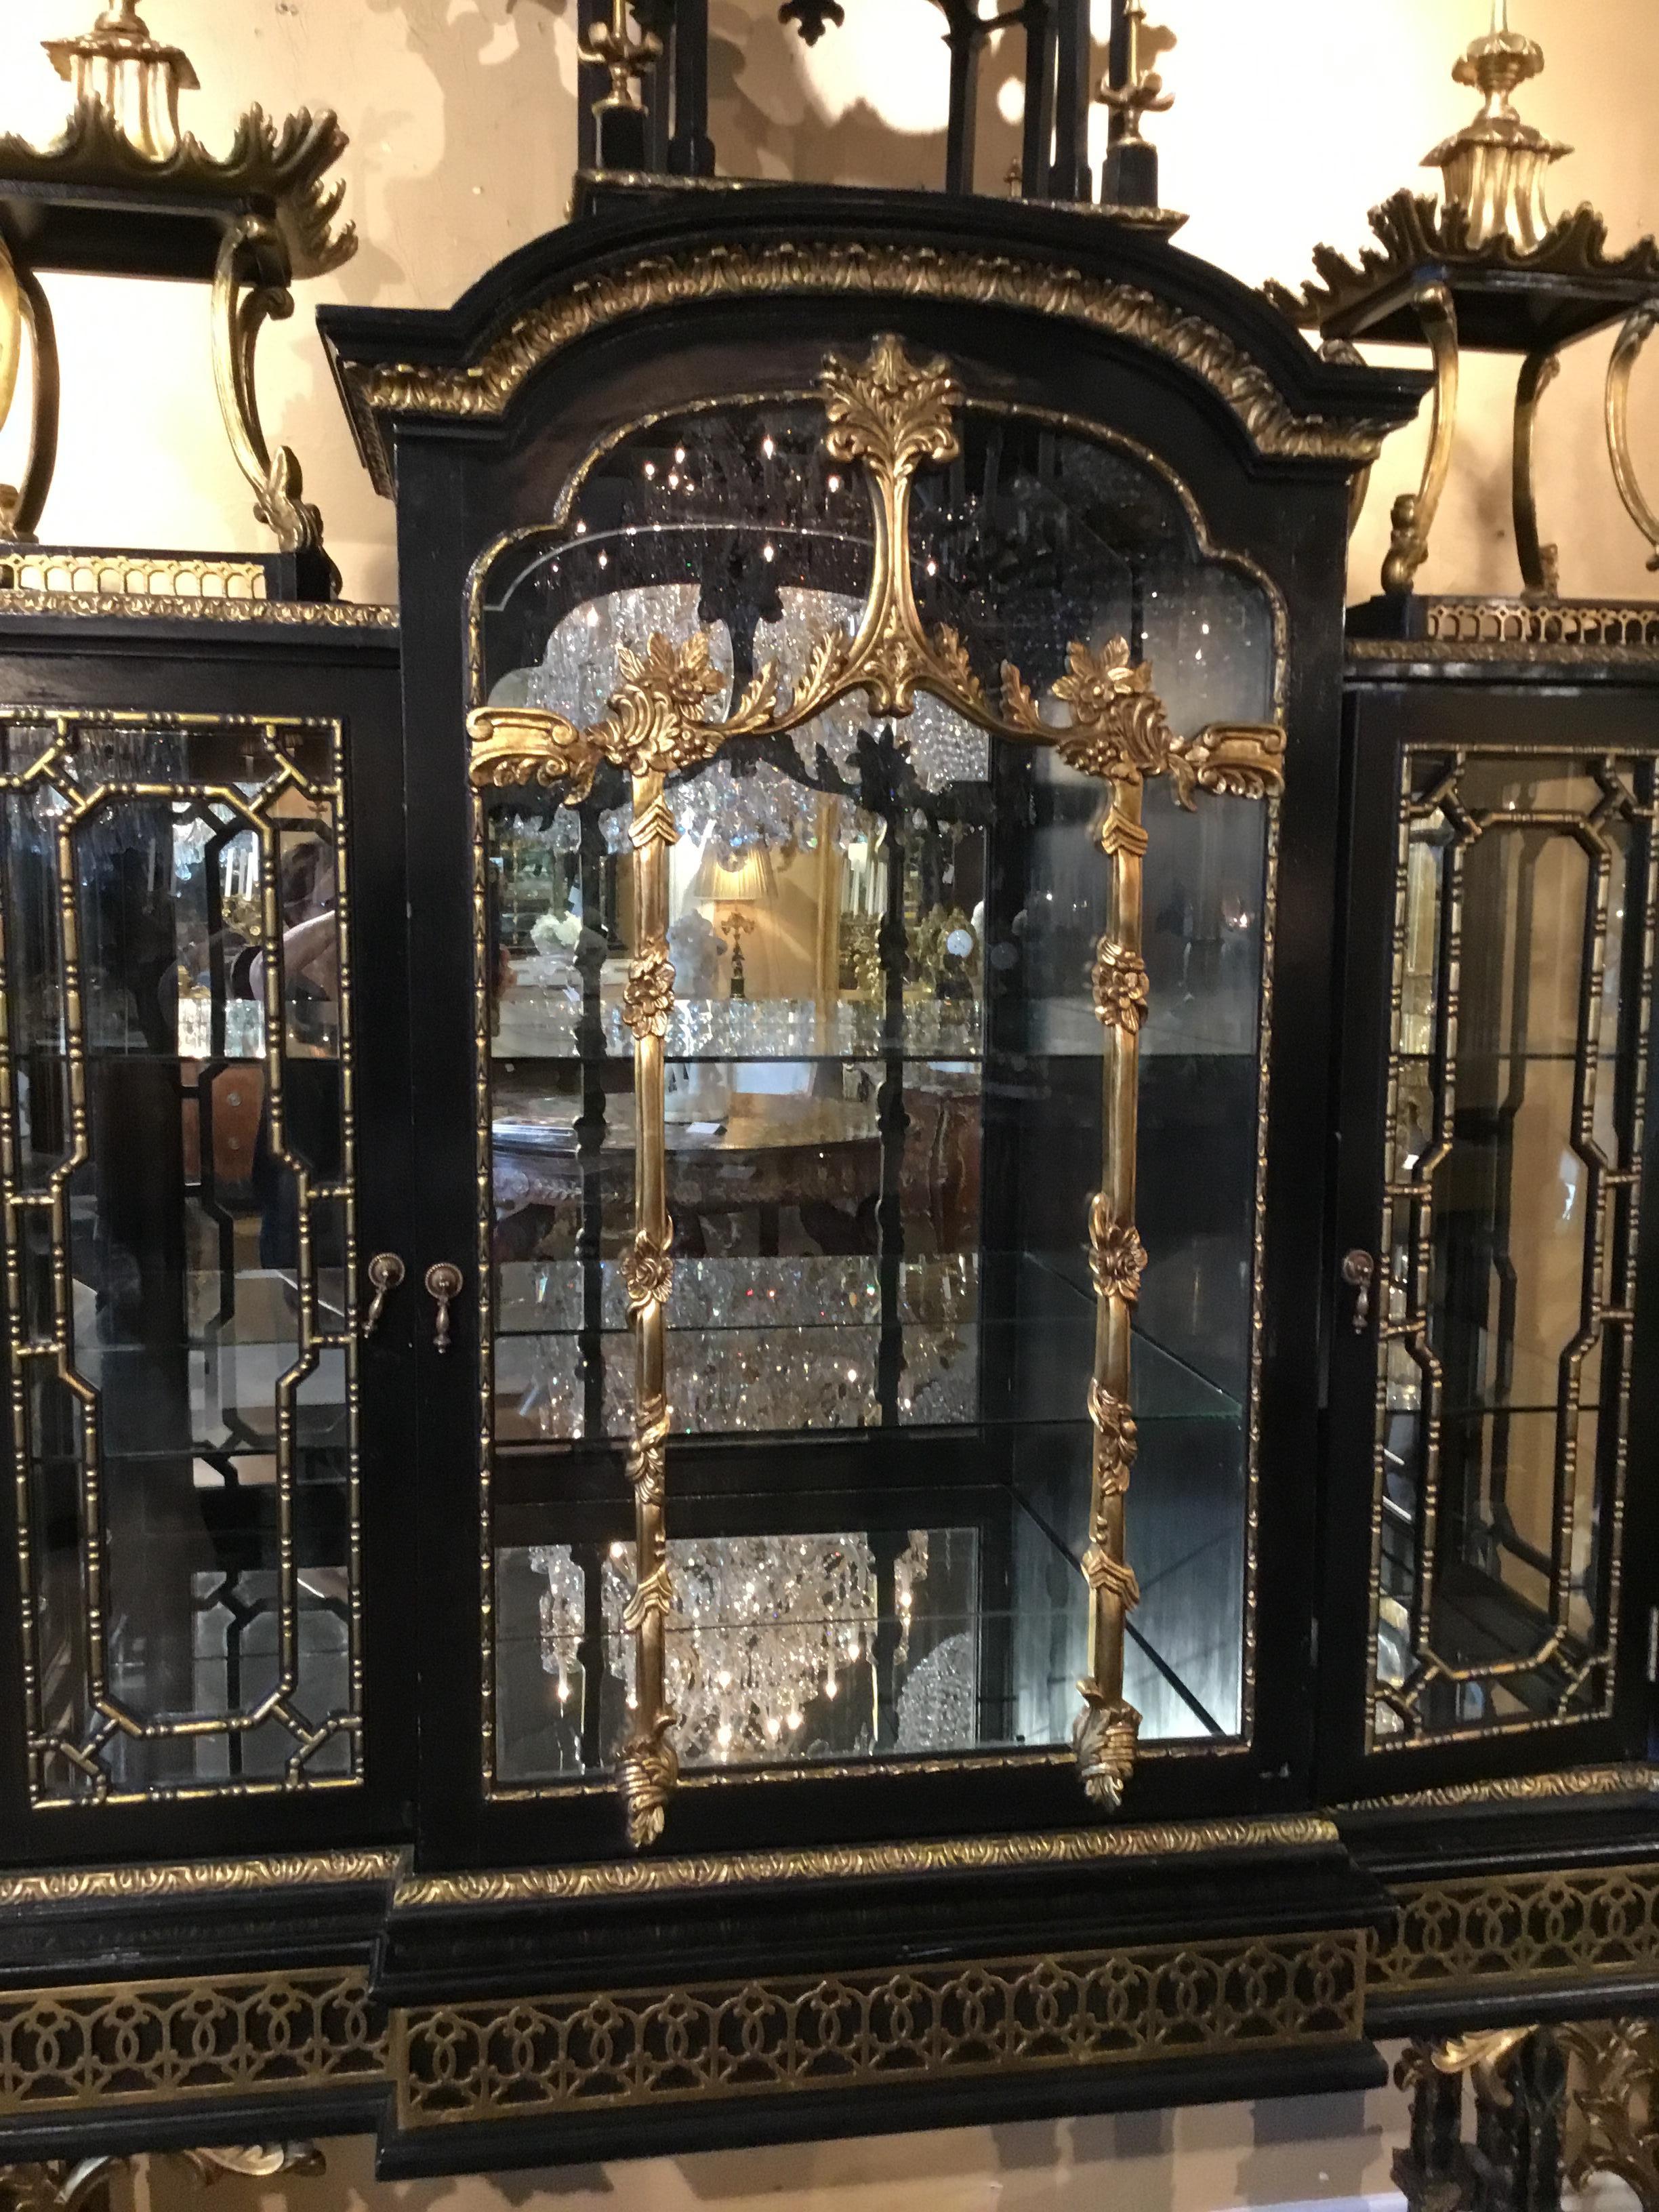 British Monumental Ebonized and Parcel-Gilt Cabinet in the Chinese Chippendale Taste